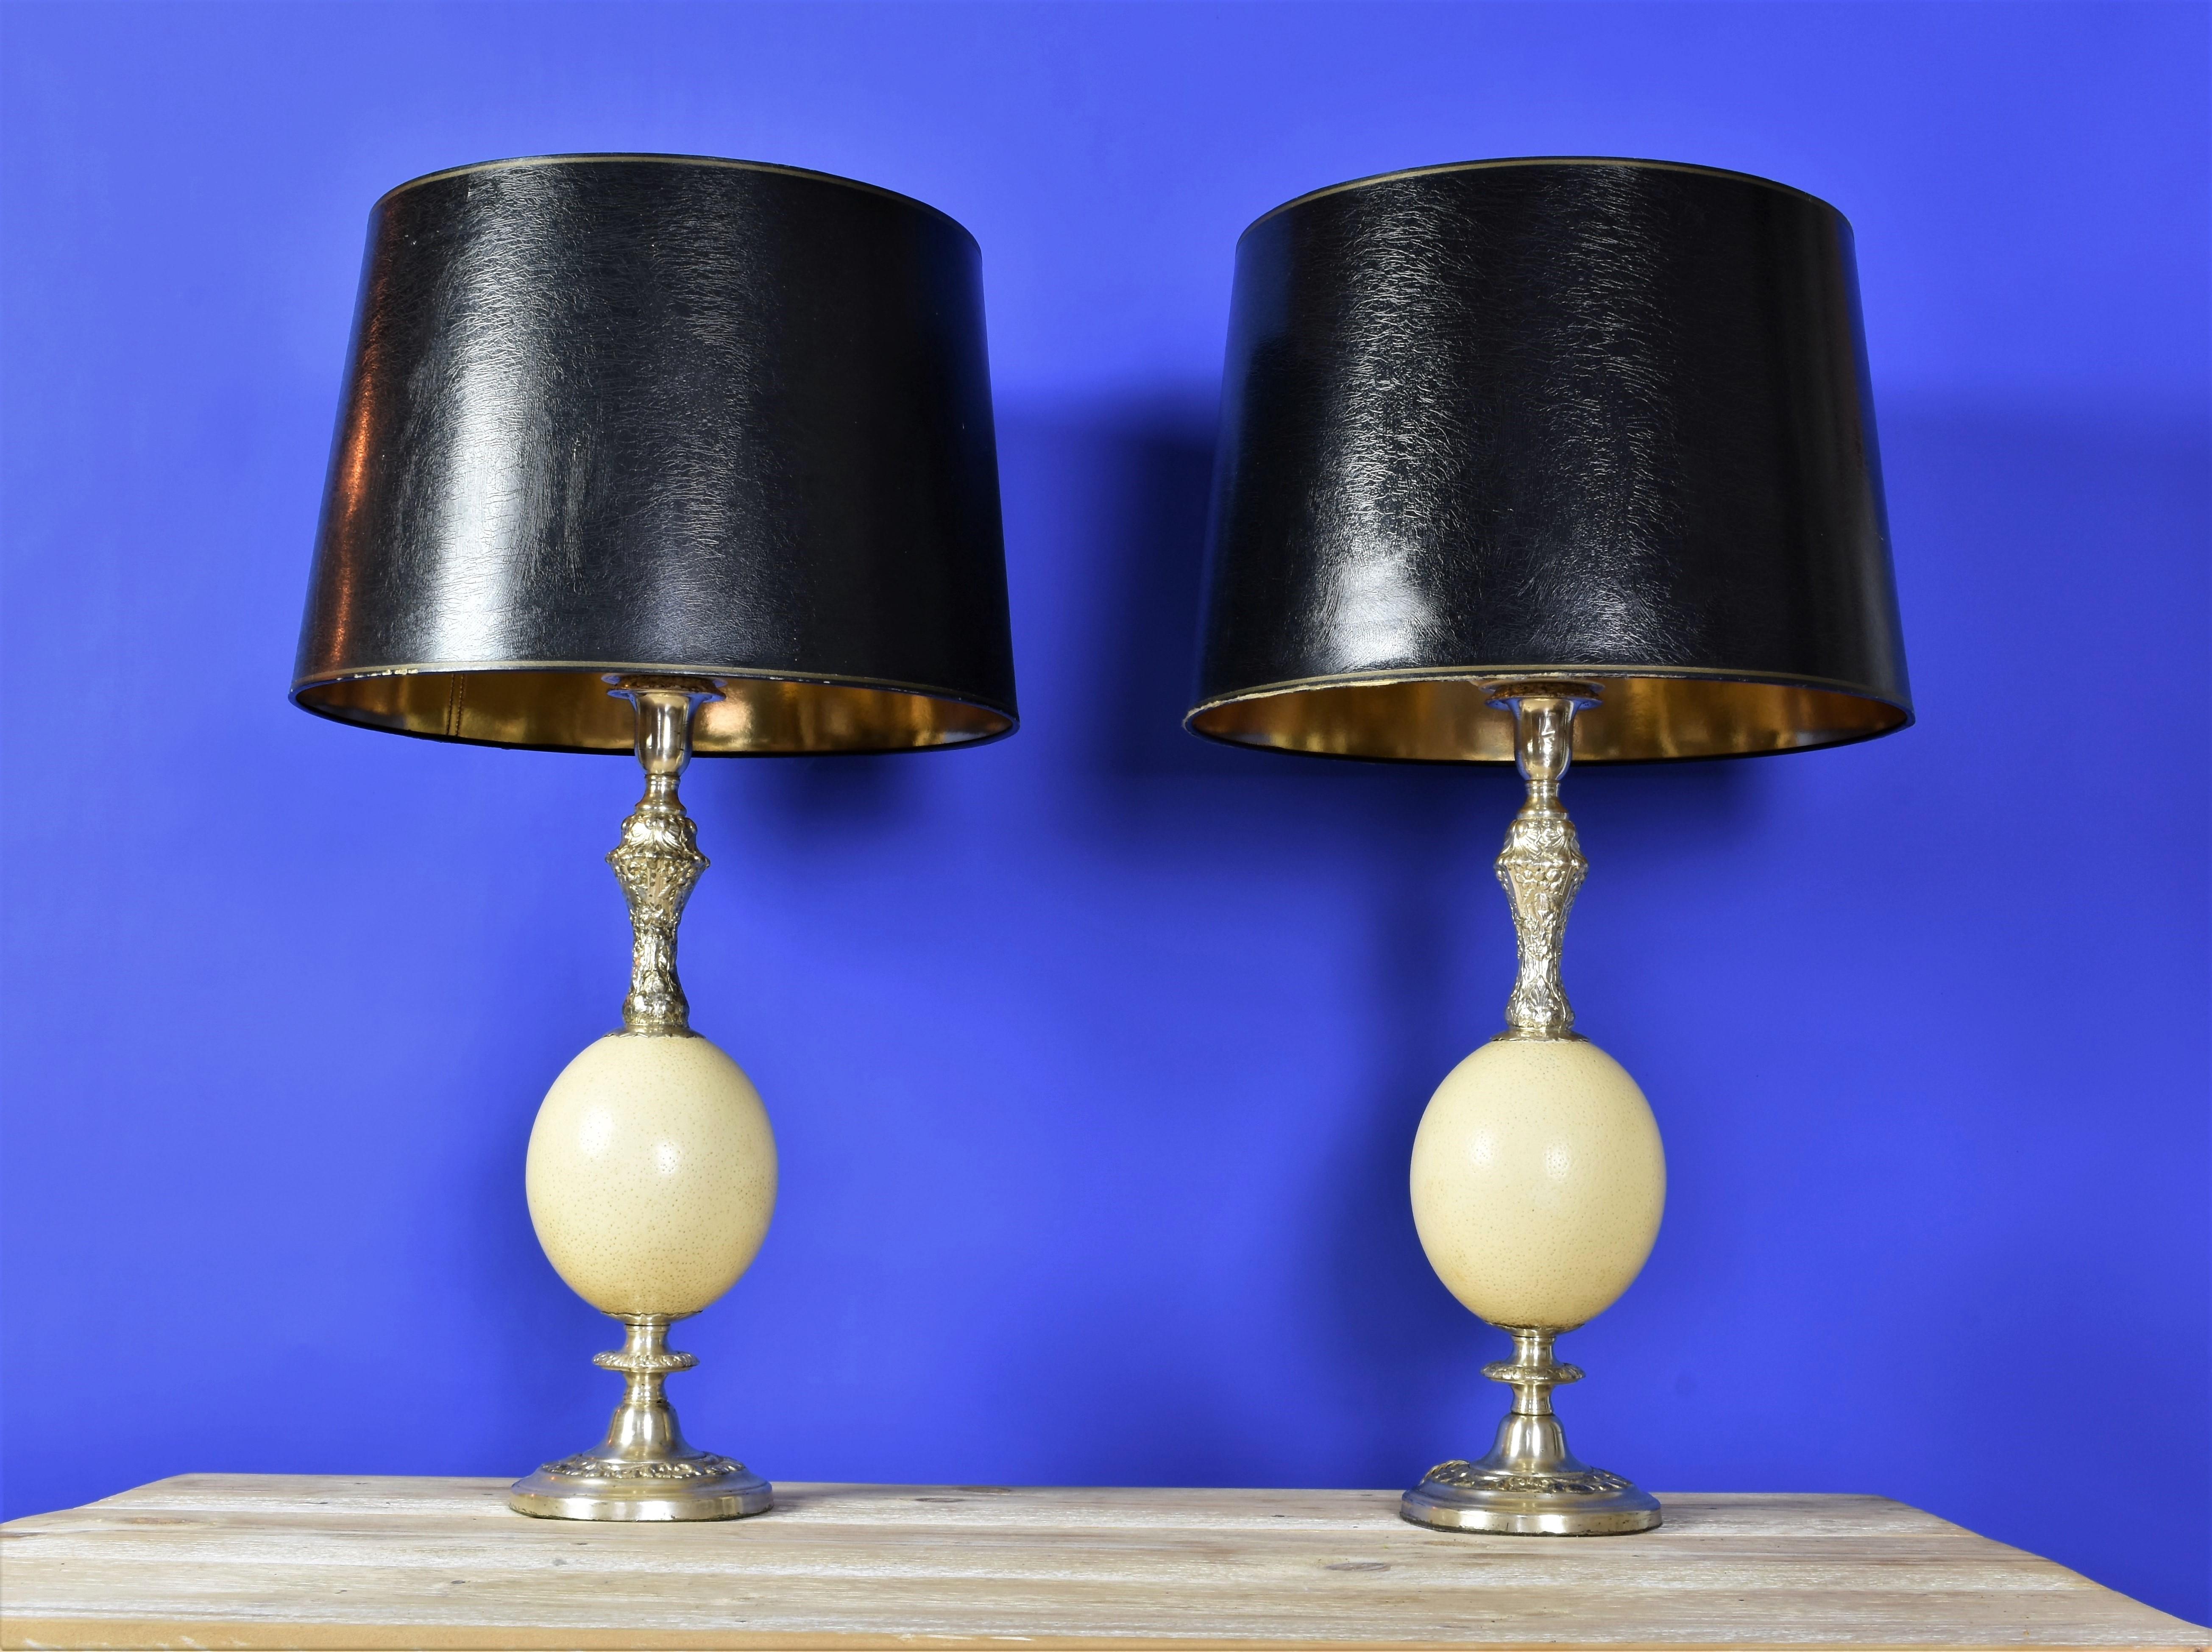 Very Classic and beautiful table lamps featuring a real ostrich egg. The shades are for display purpose only and not part of the sale.